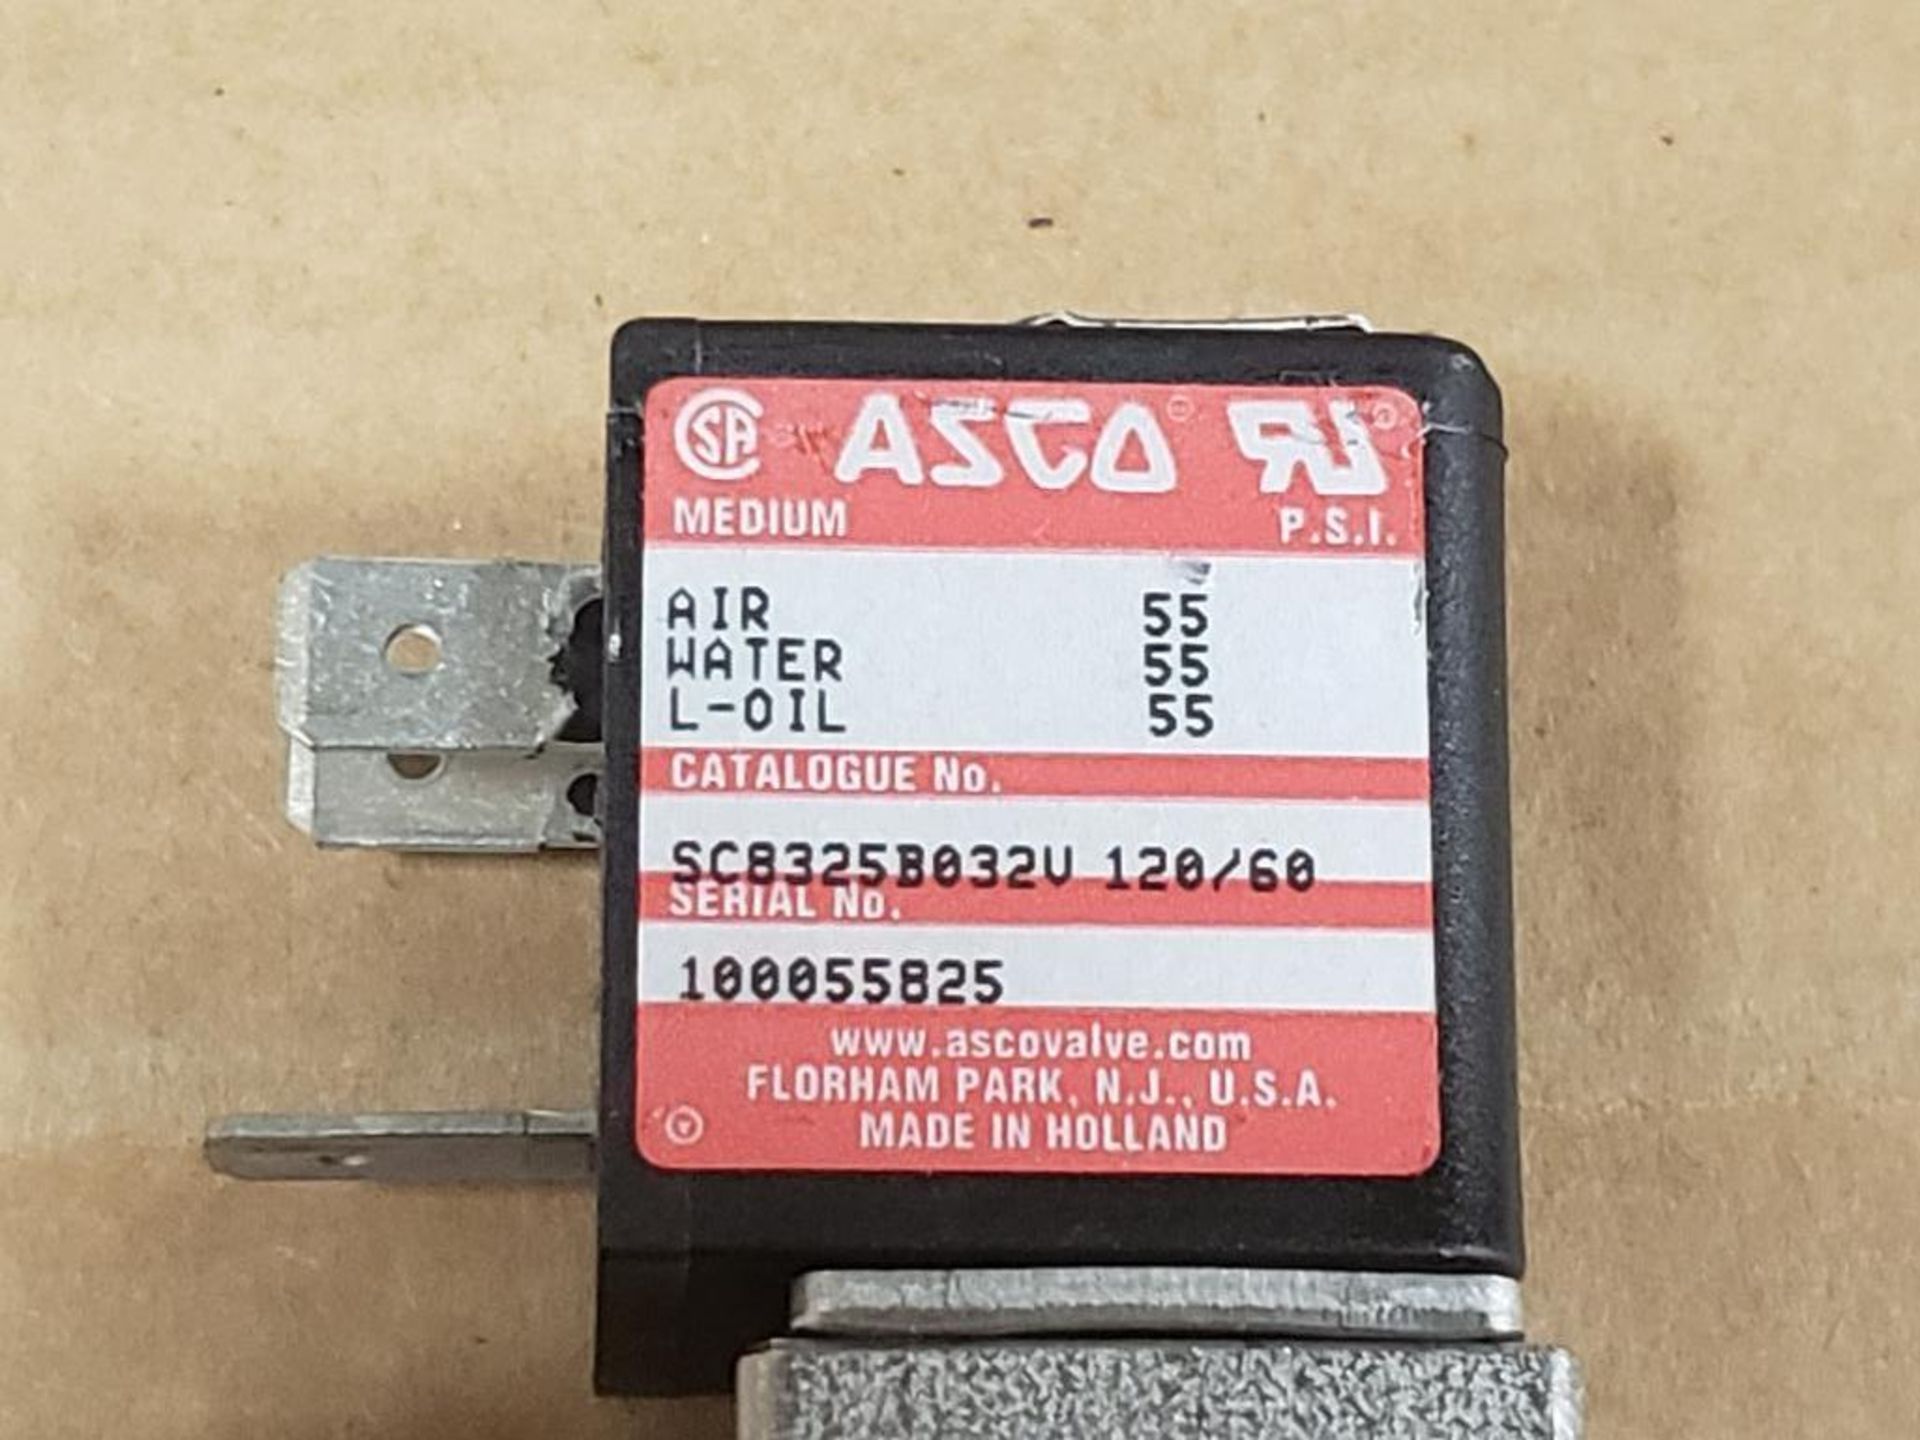 Qty 21 - ASCO SC8325B032V 120/60 solenoid valve. 55psi air/ 55 water / 55 l-oil. New in package. - Image 3 of 4